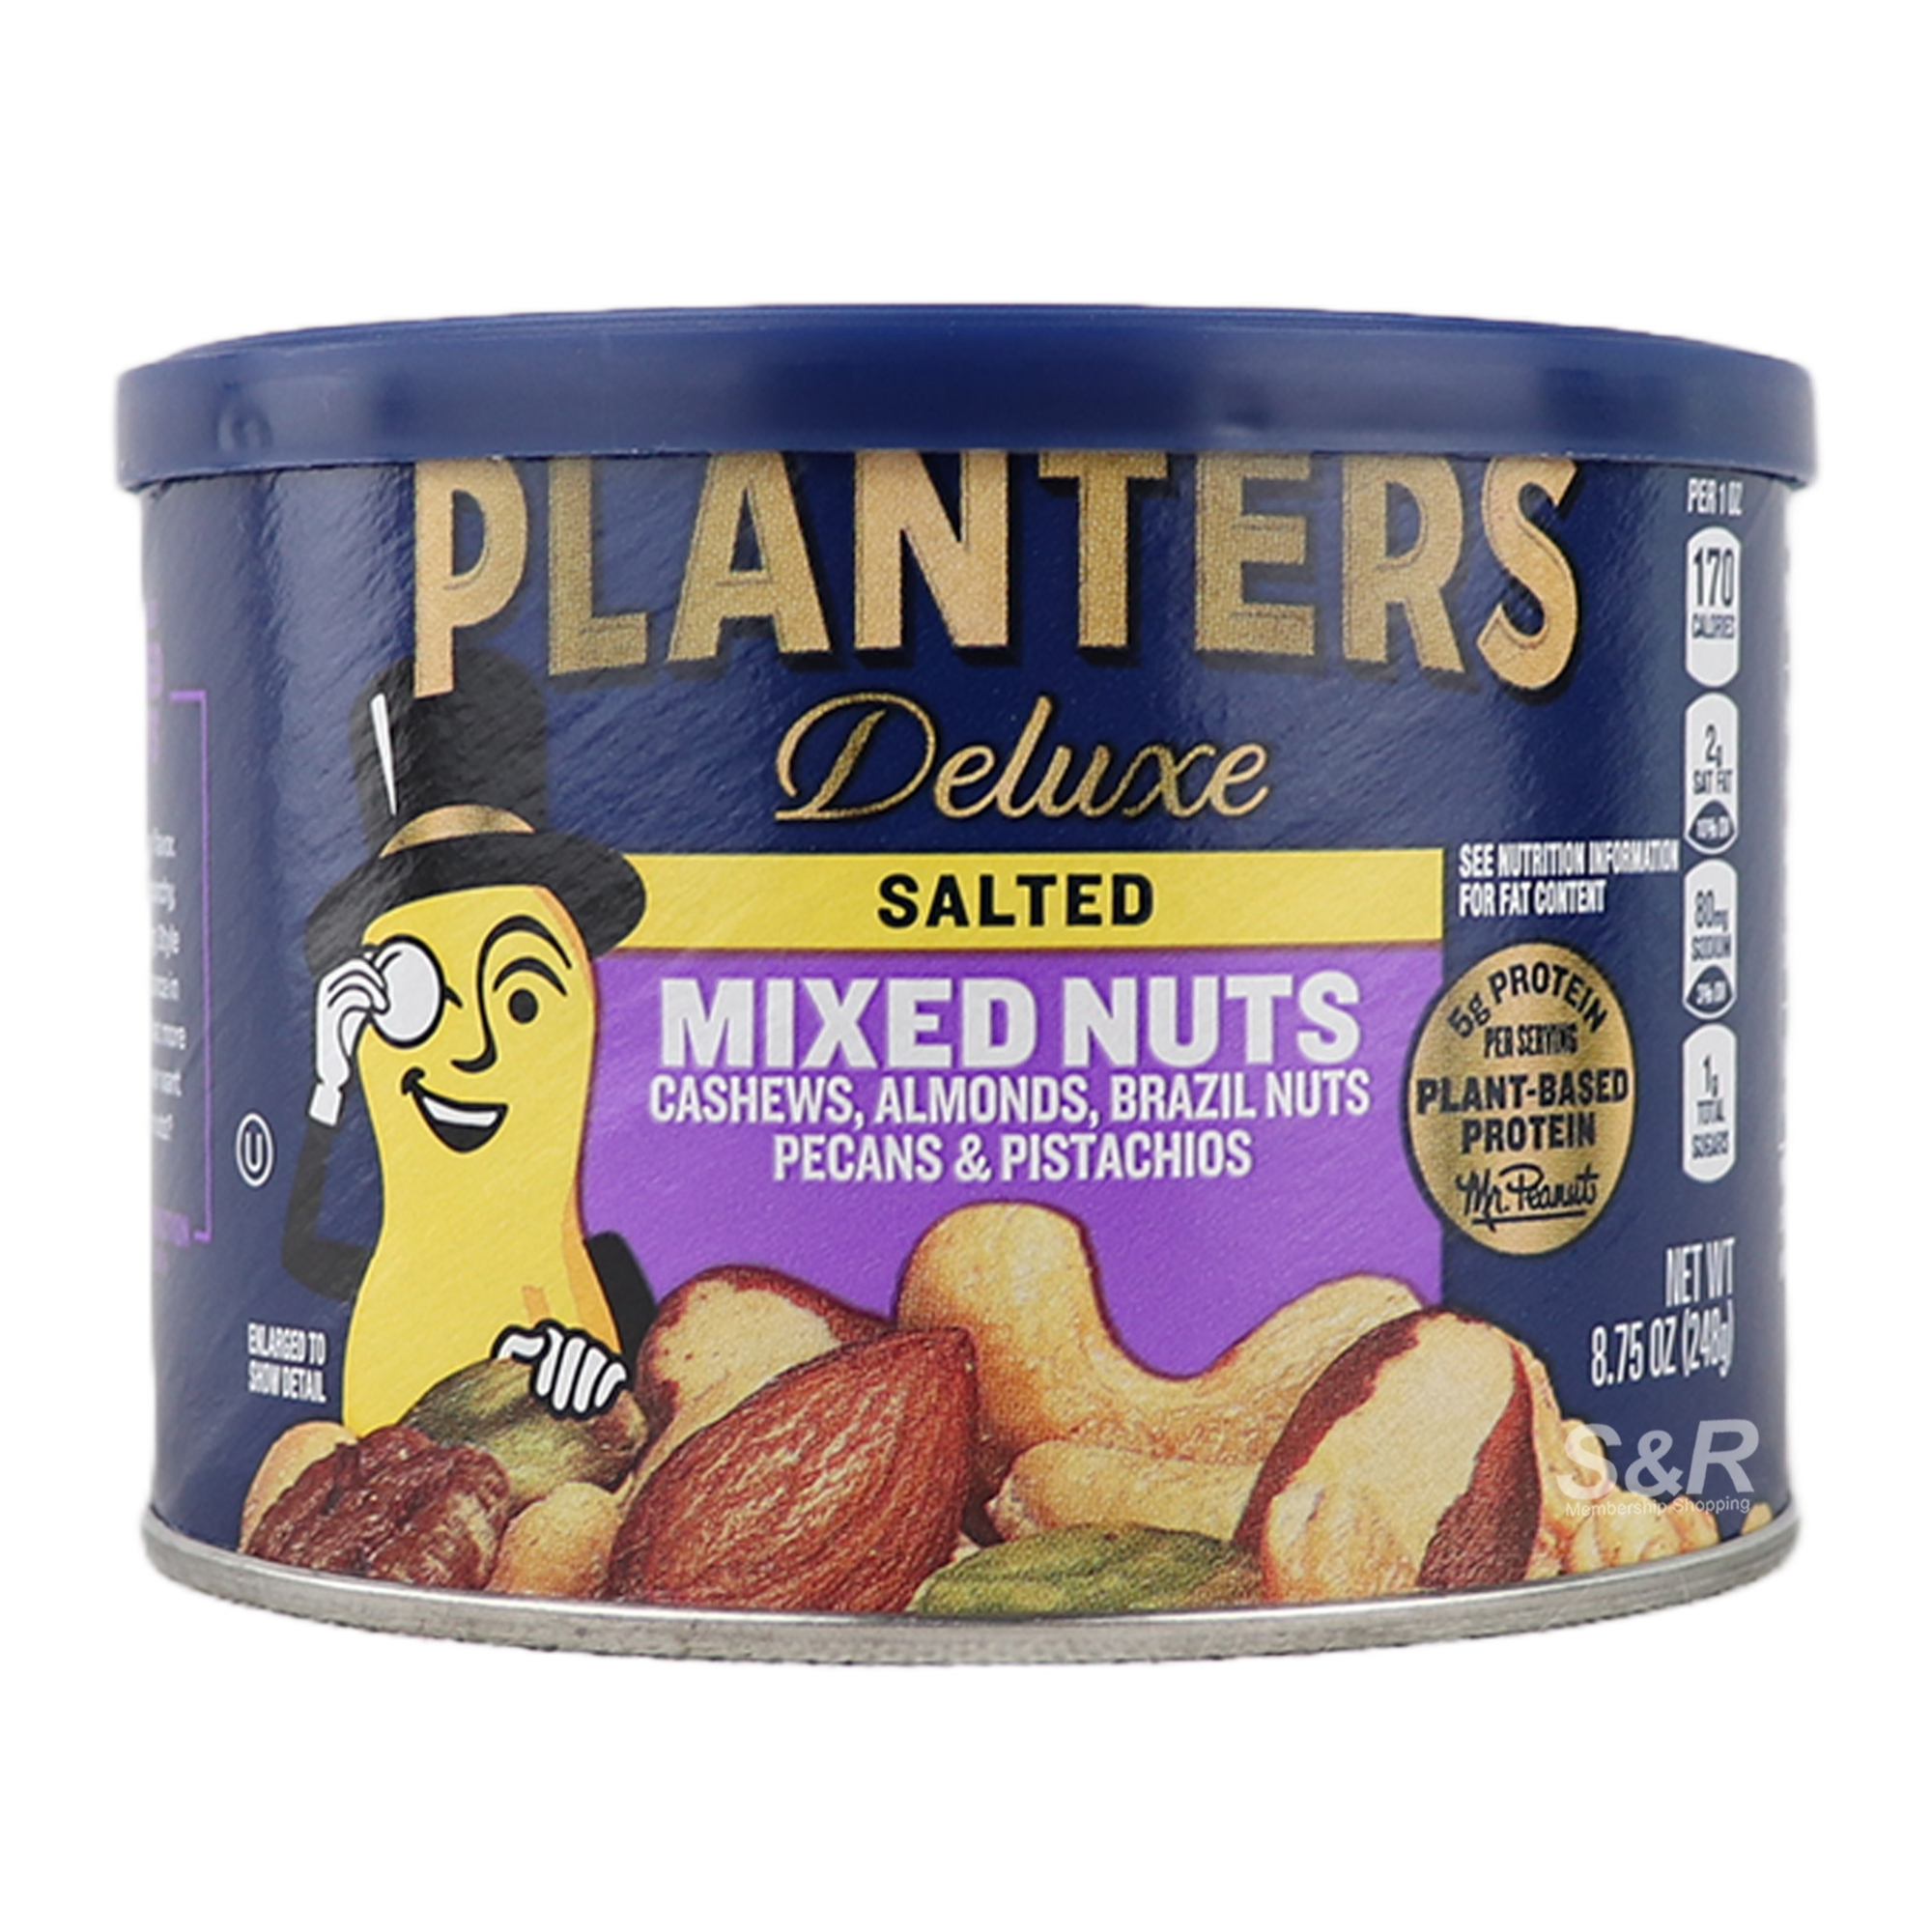 Planters Deluxe Salted Mixed Nuts 248g